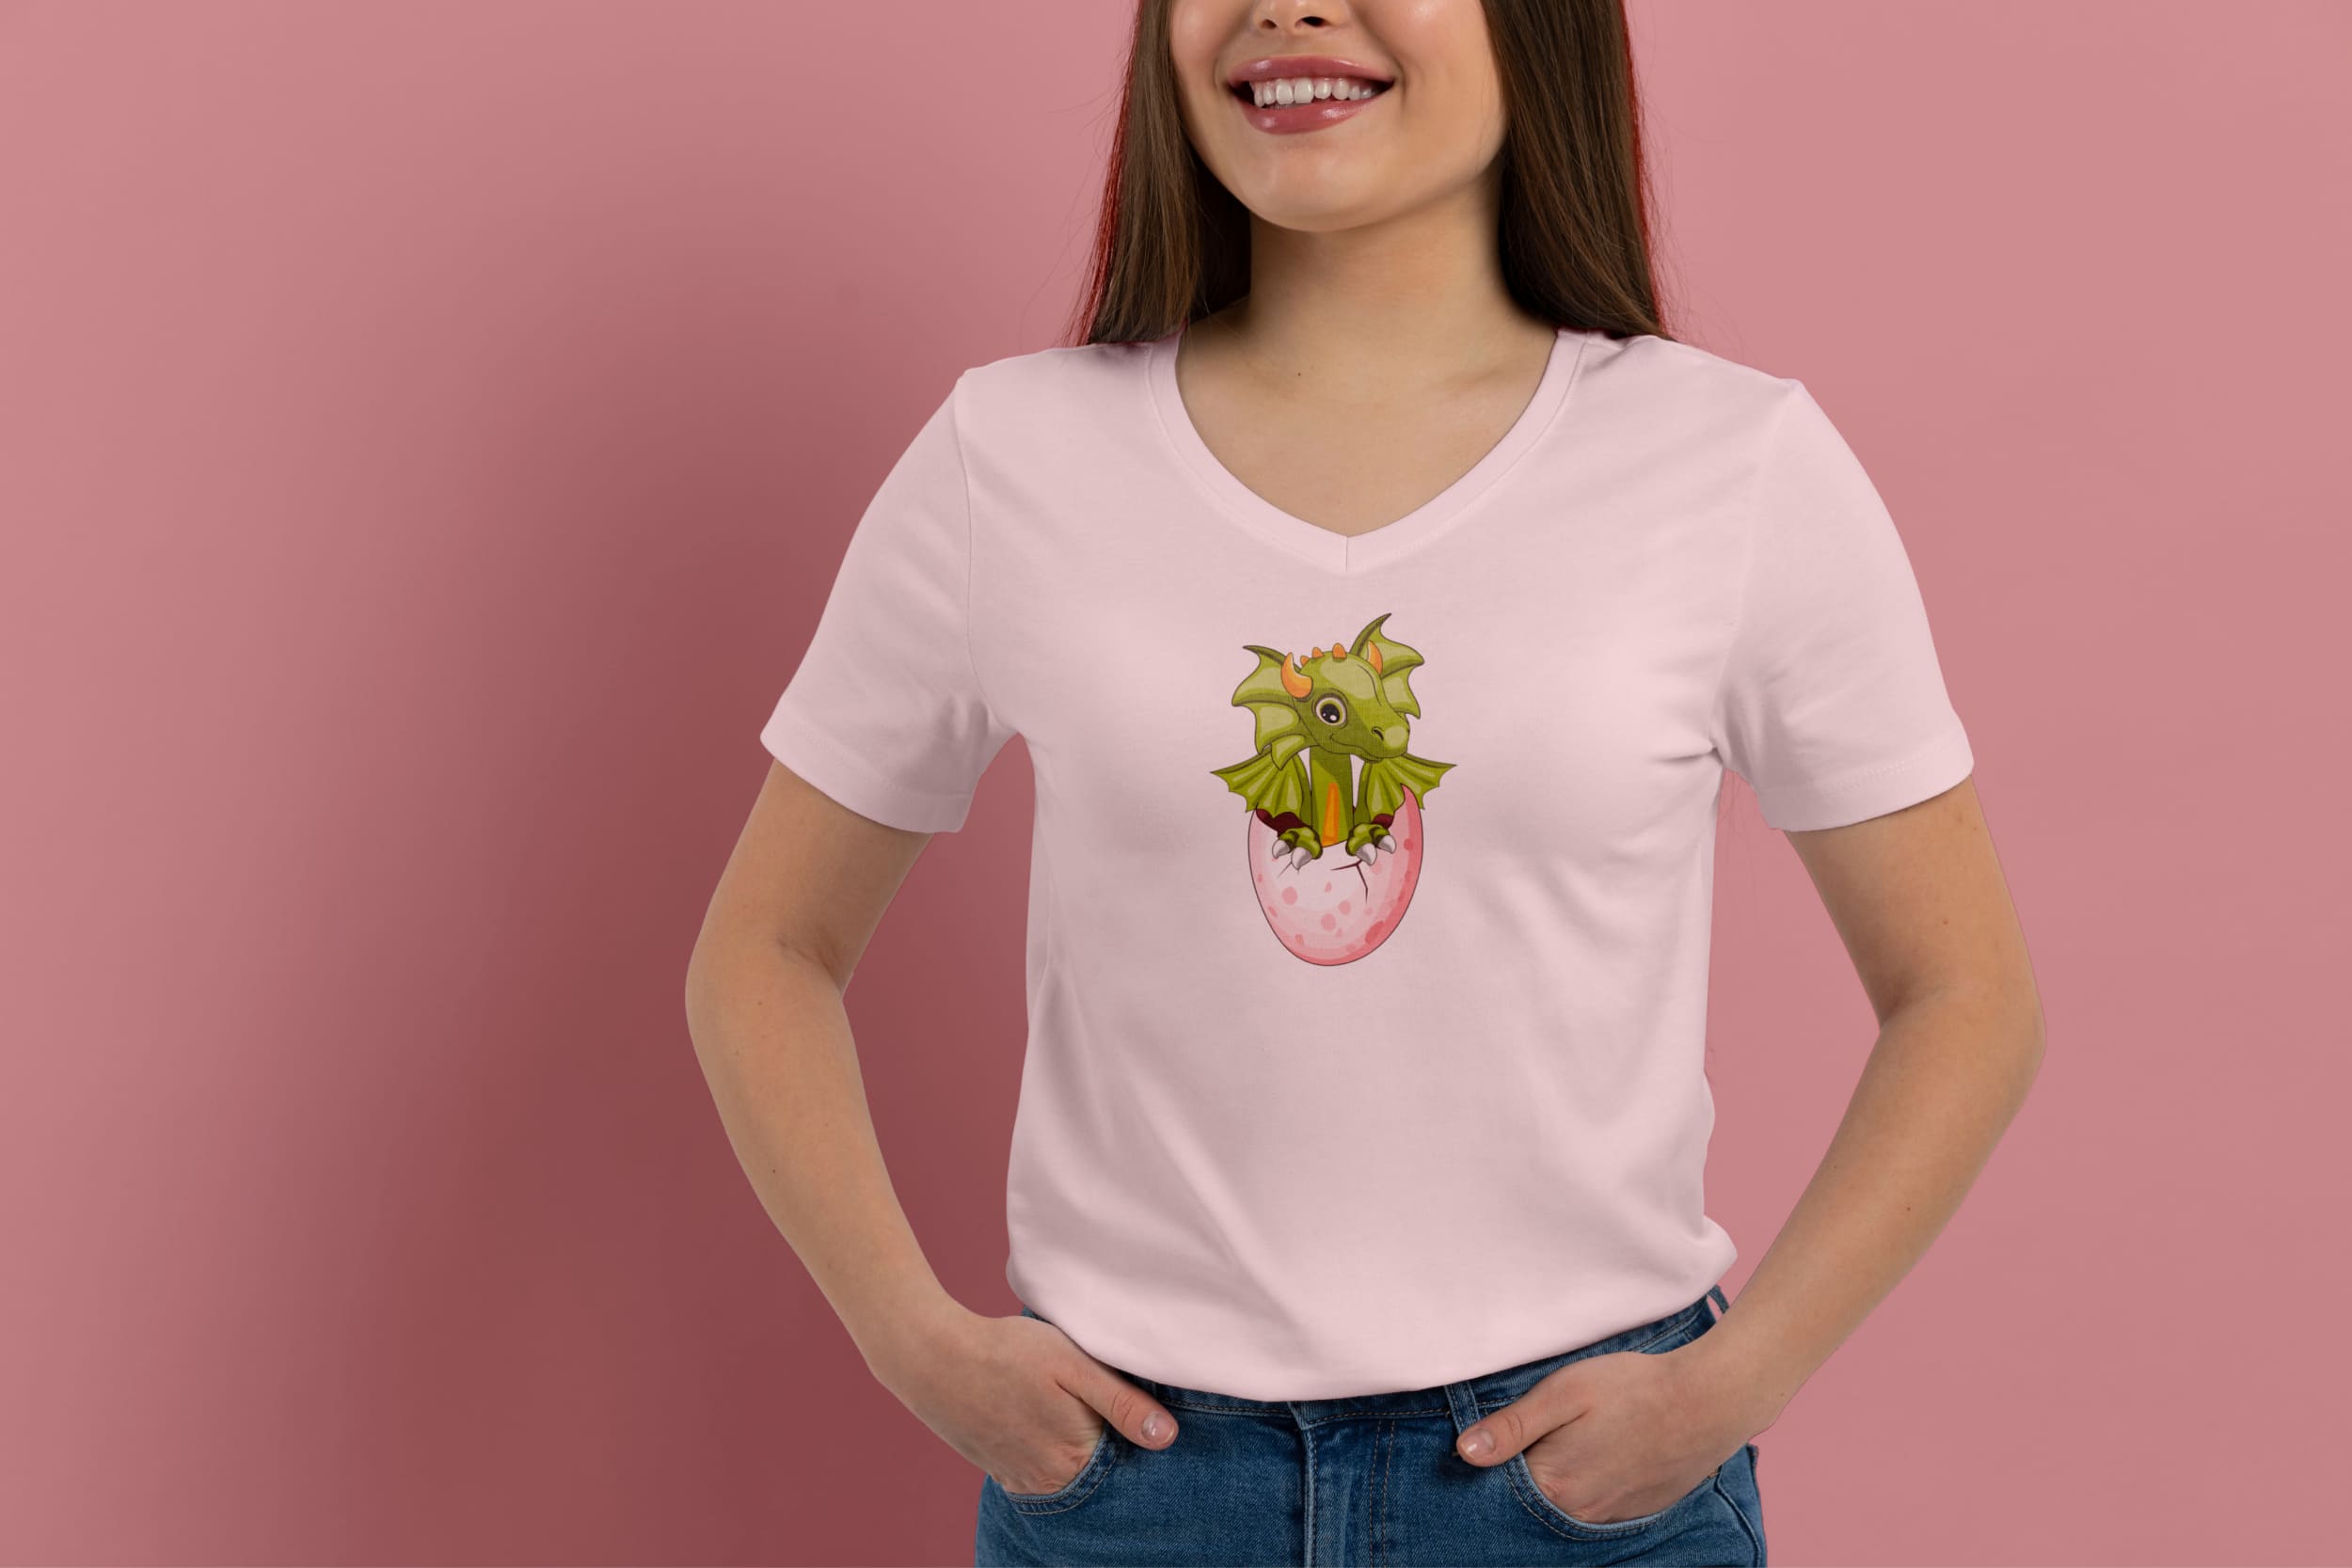 Light pink t-shirt on a girl with an olive baby dragon hatched from an egg, on a pink background.